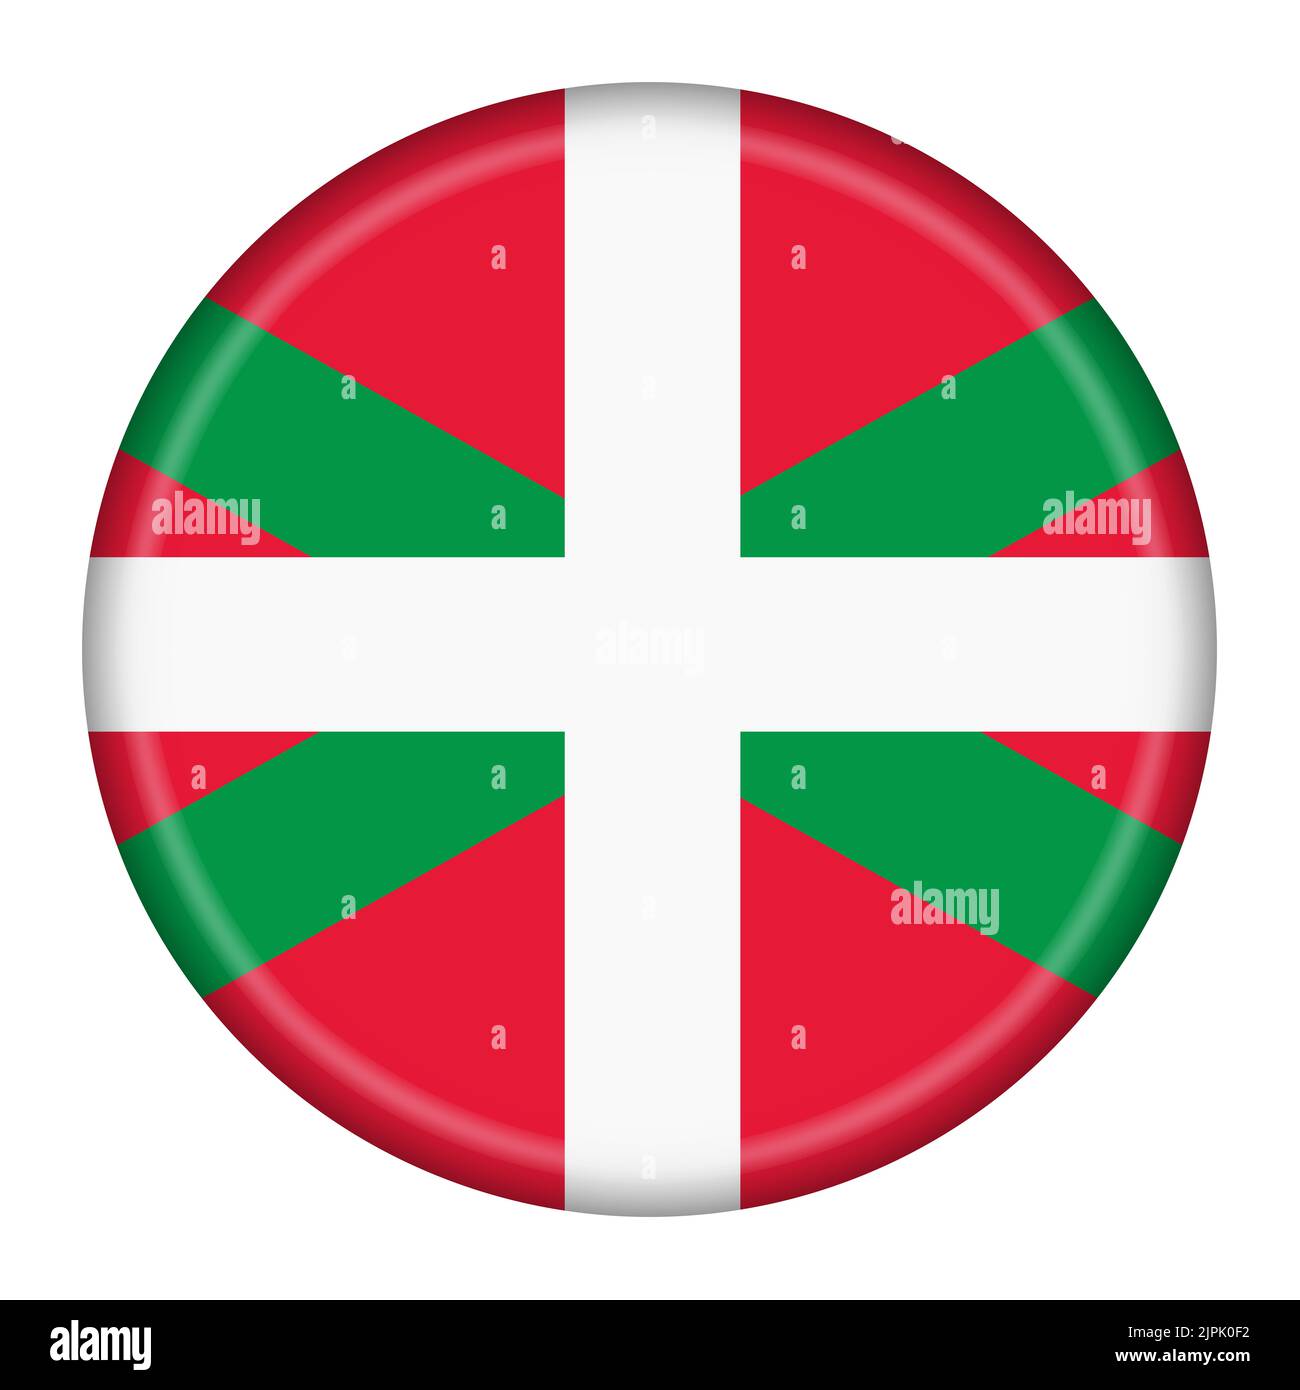 Basque flag button 3d illustration with clipping path Stock Photo